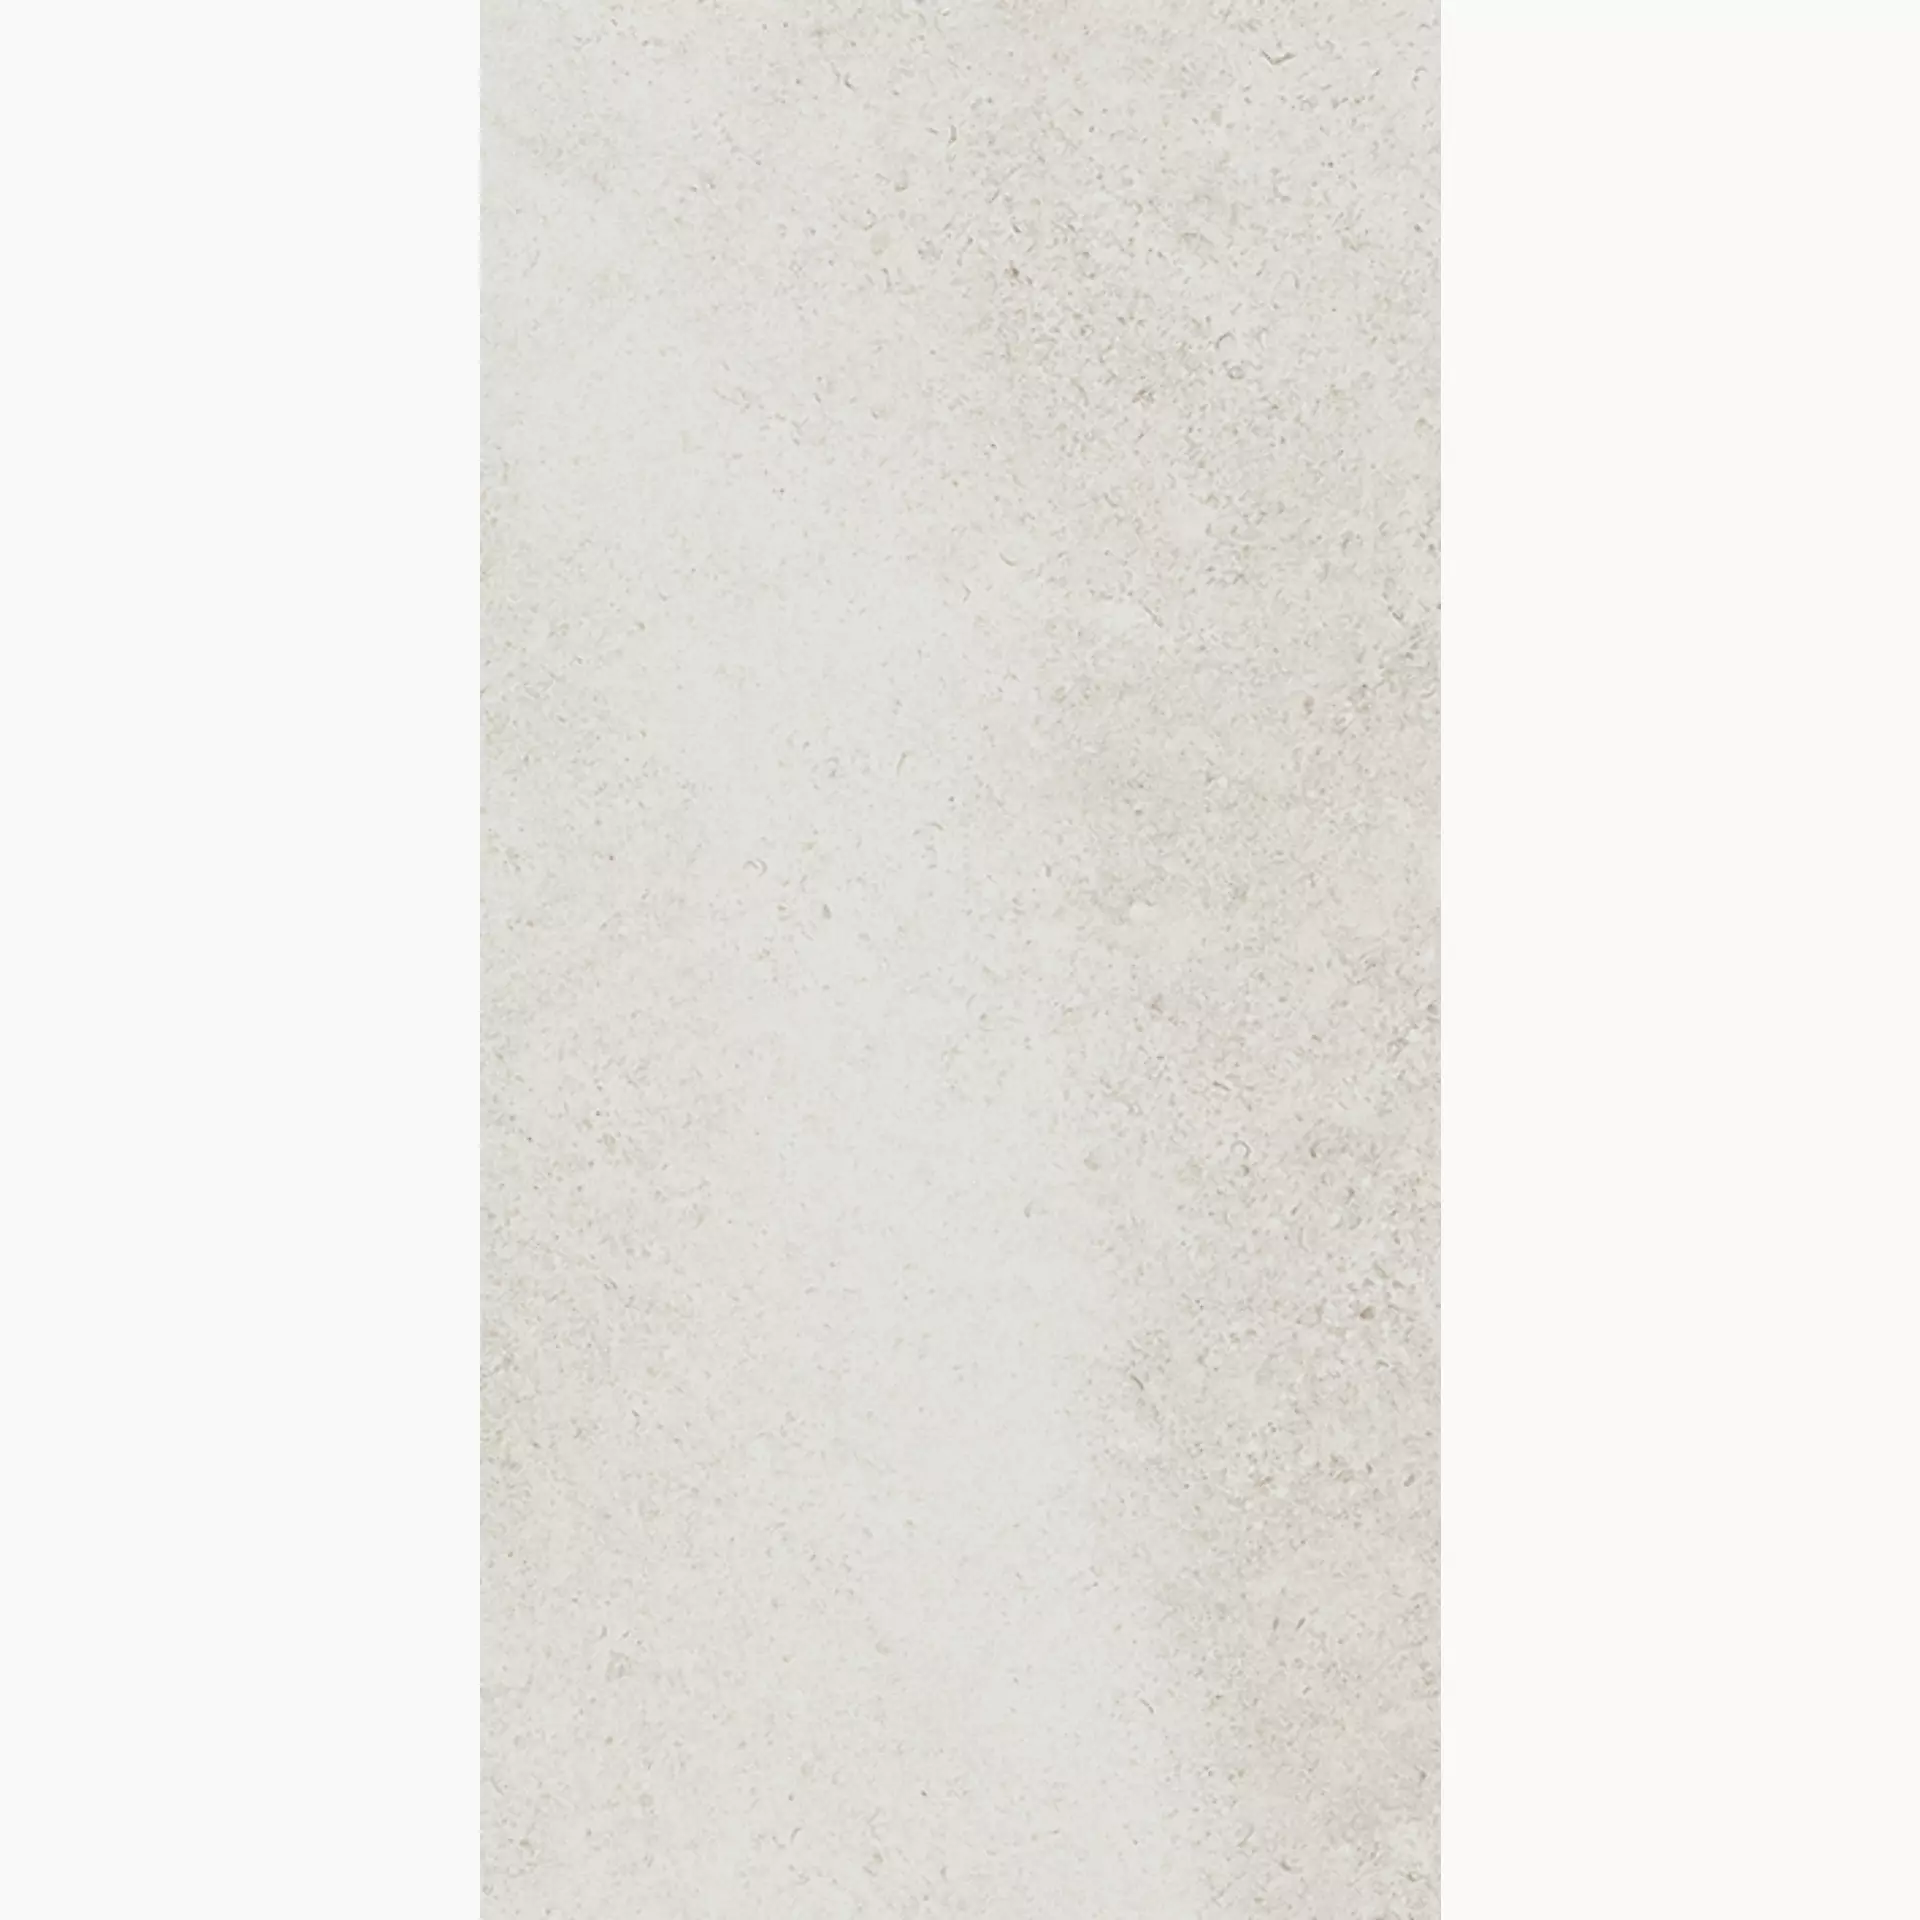 Villeroy & Boch Hudson White Sand Rough – Polished 2576-SD1L 30x60cm rectified 10mm